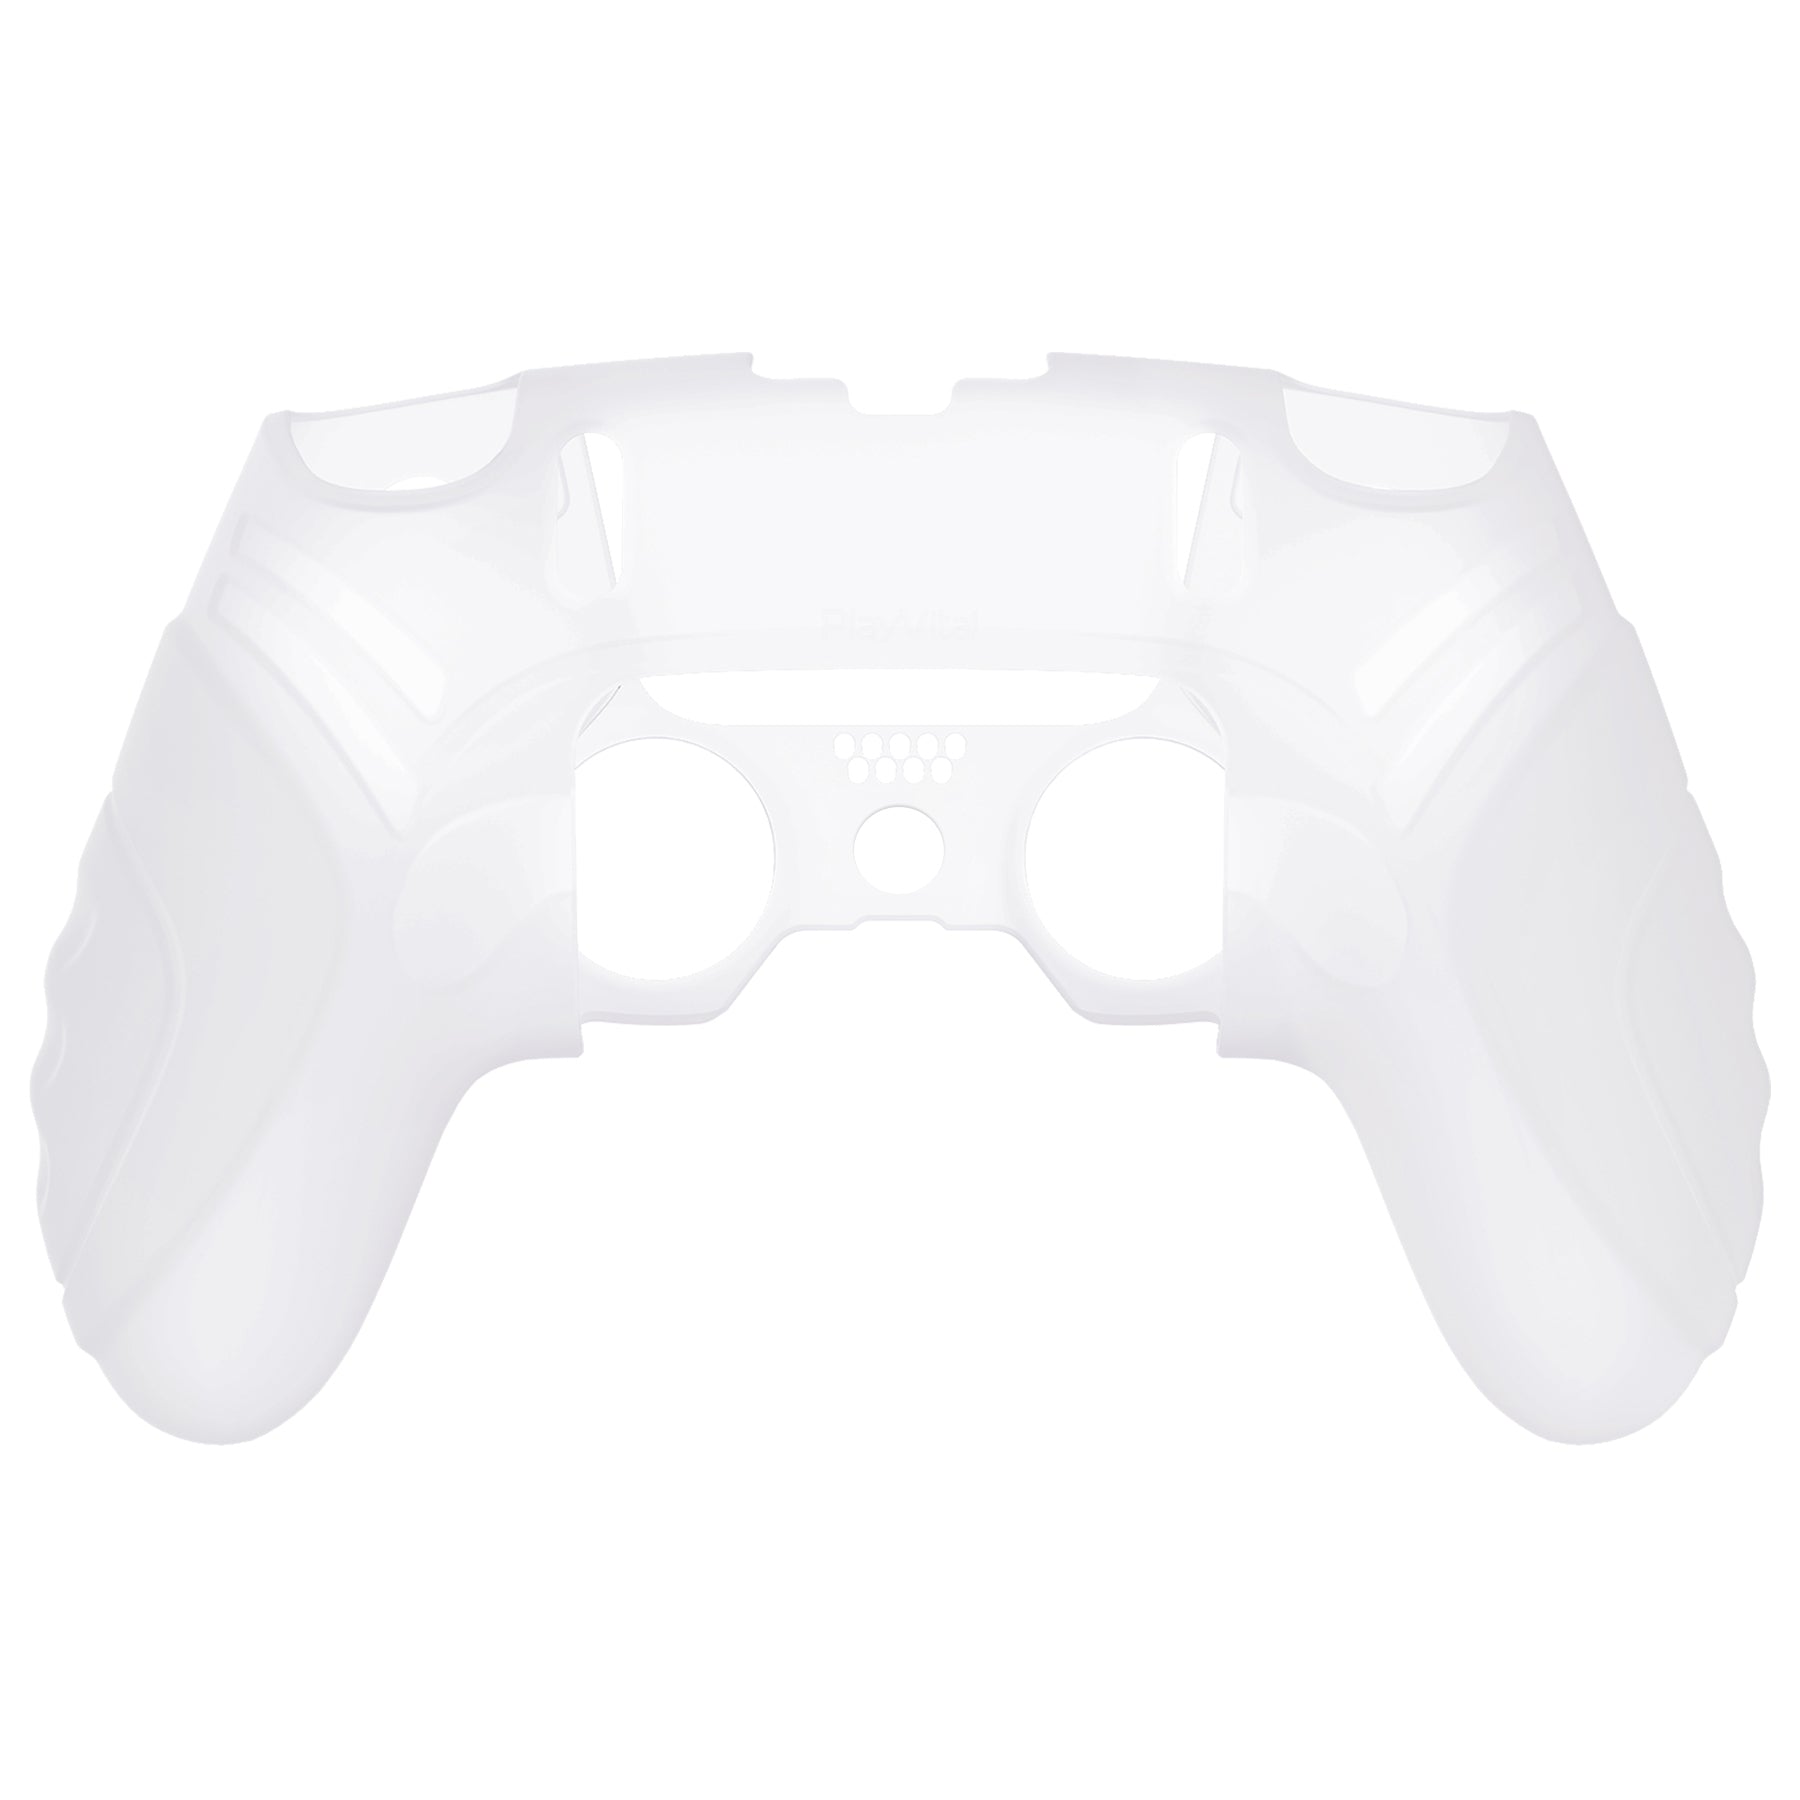 PlayVital Guardian Edition Anti-Slip Ergonomic Silicone Cover Case with Thumb Grip Caps for PS5 Edge Controller - Clear White - EHPFP003 PlayVital